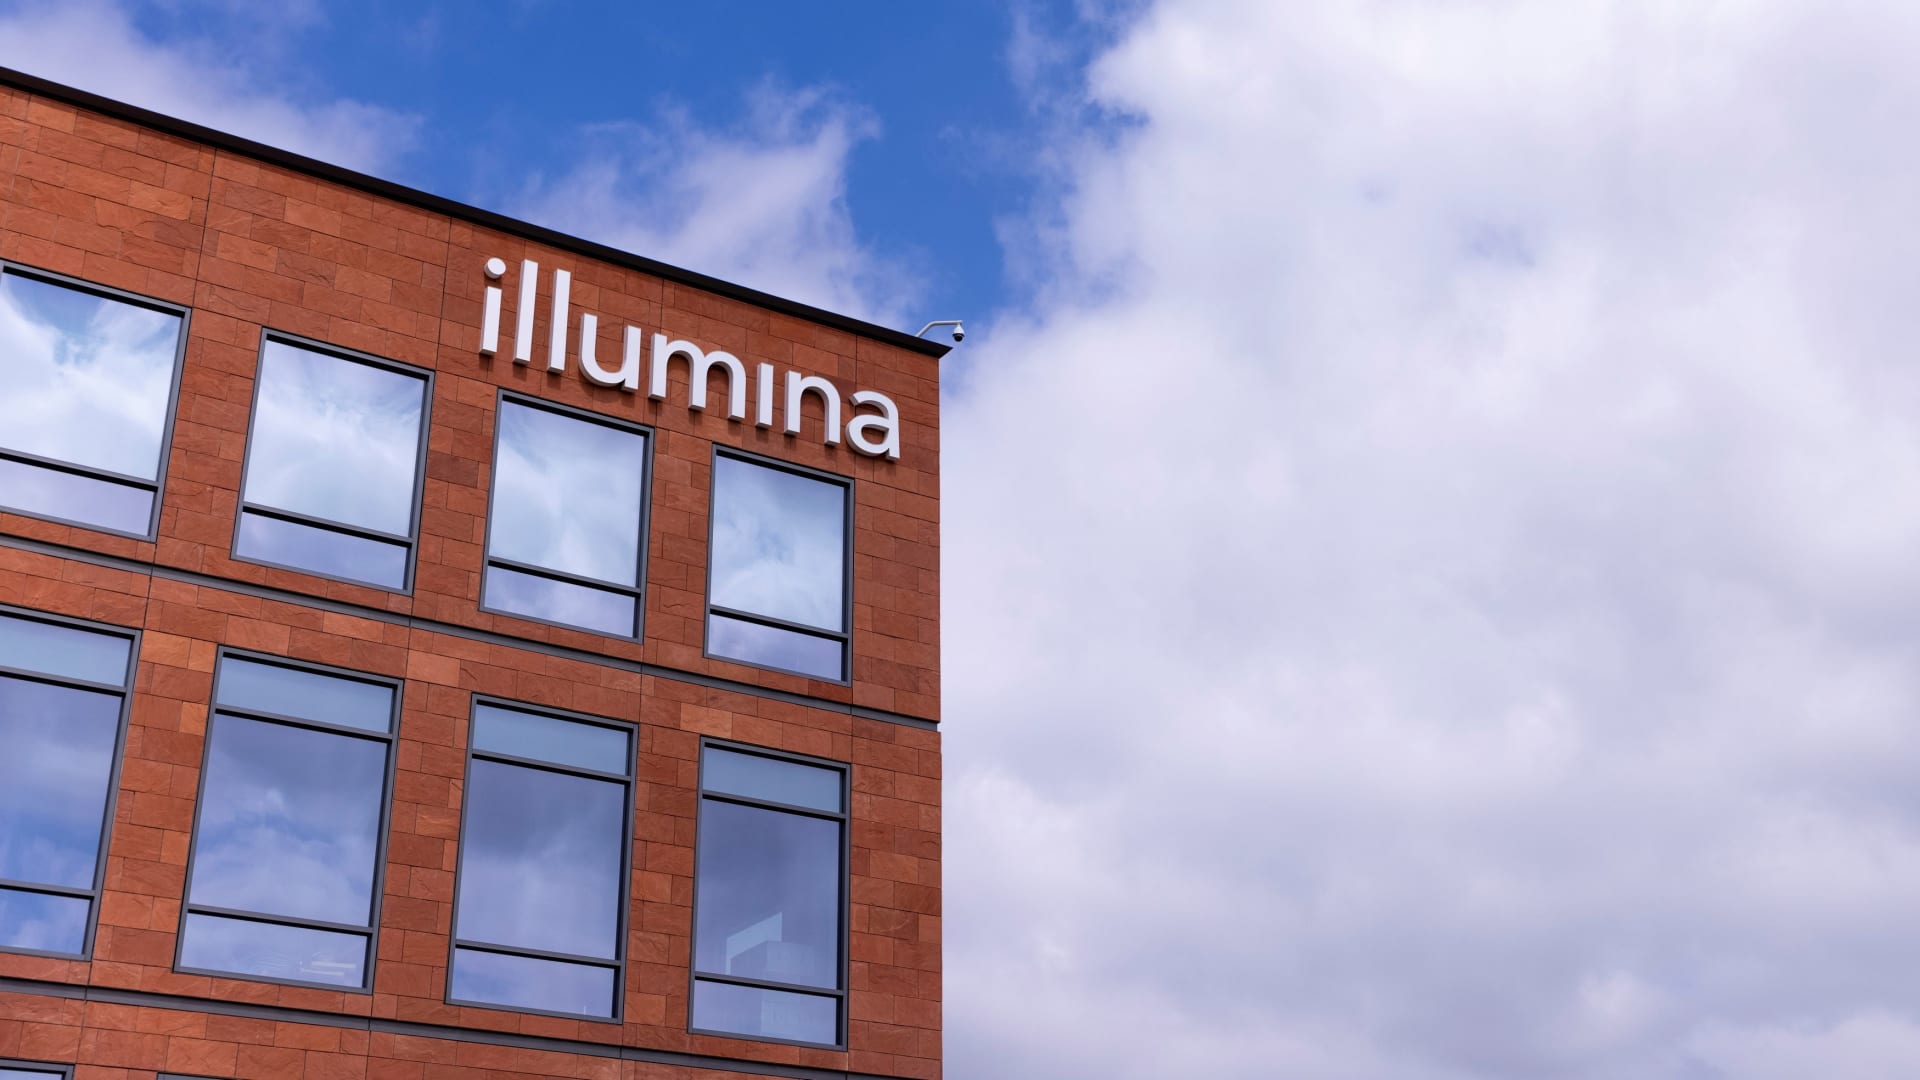 Illumina names CEO Jacob Thaysen after Icahn proxy fight over Grail